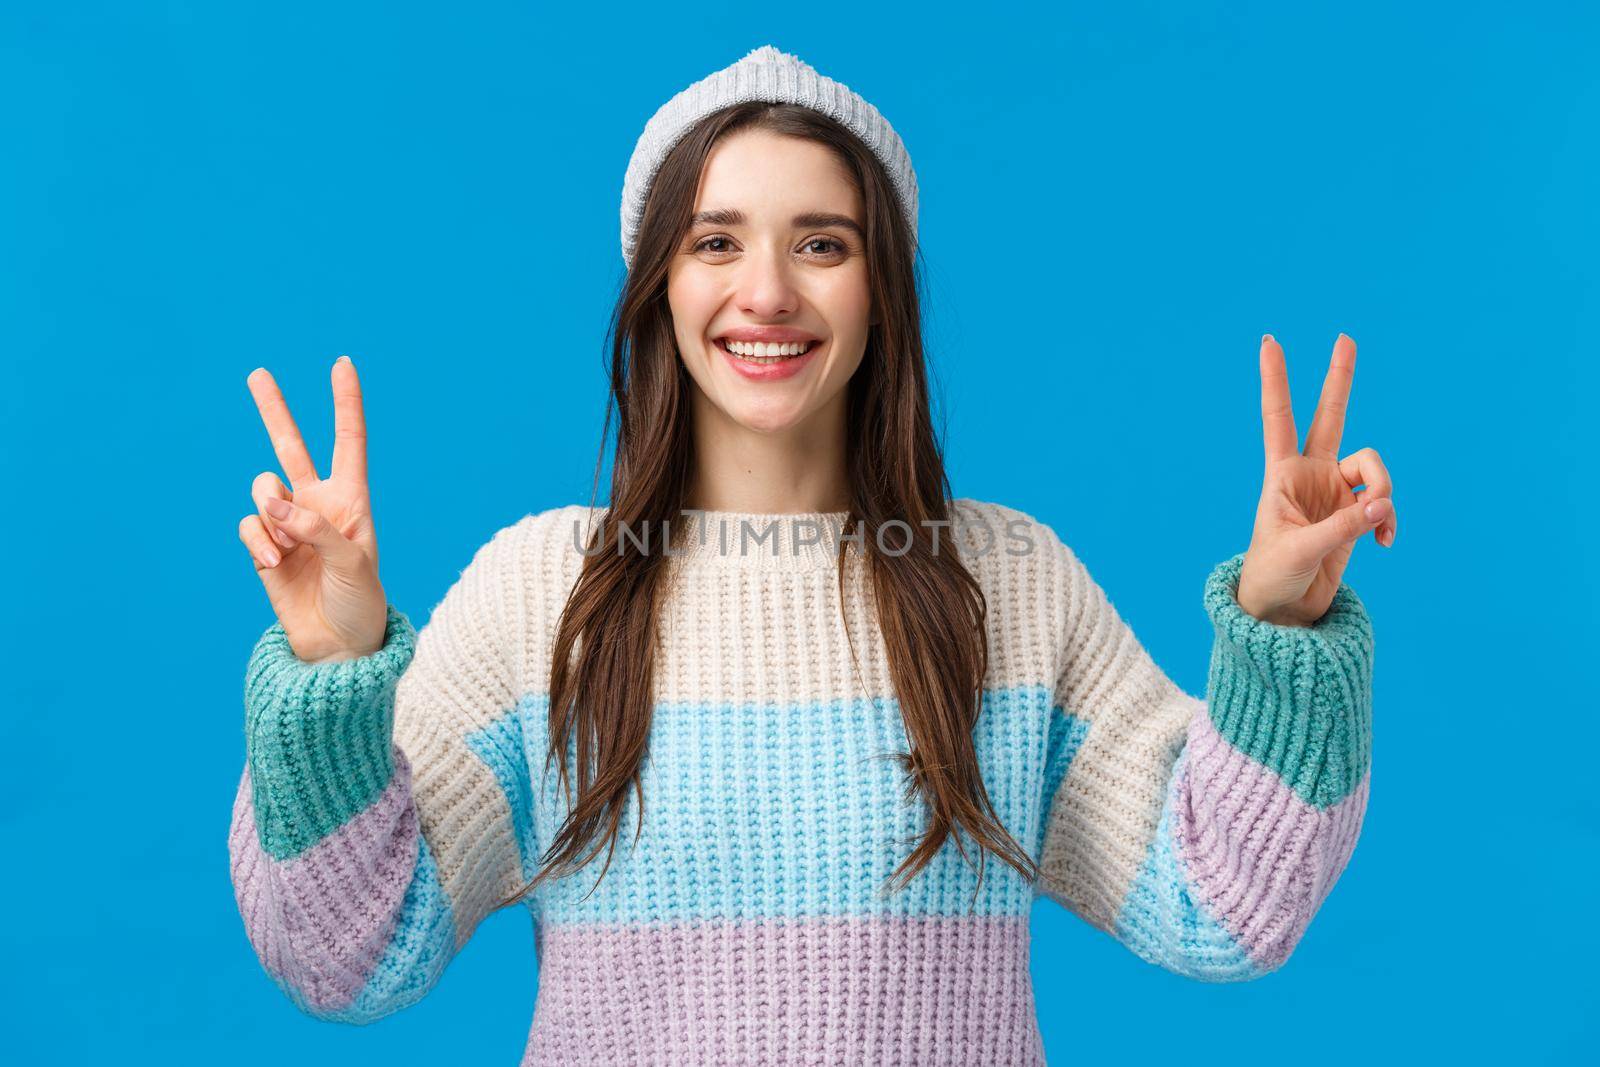 Happy and carefree cute, charismatic brunette female in winter sweater, hat, showing two peace signs and smiling broadly, photographing on winter holidays, mountain ski luxury resort, blue background.